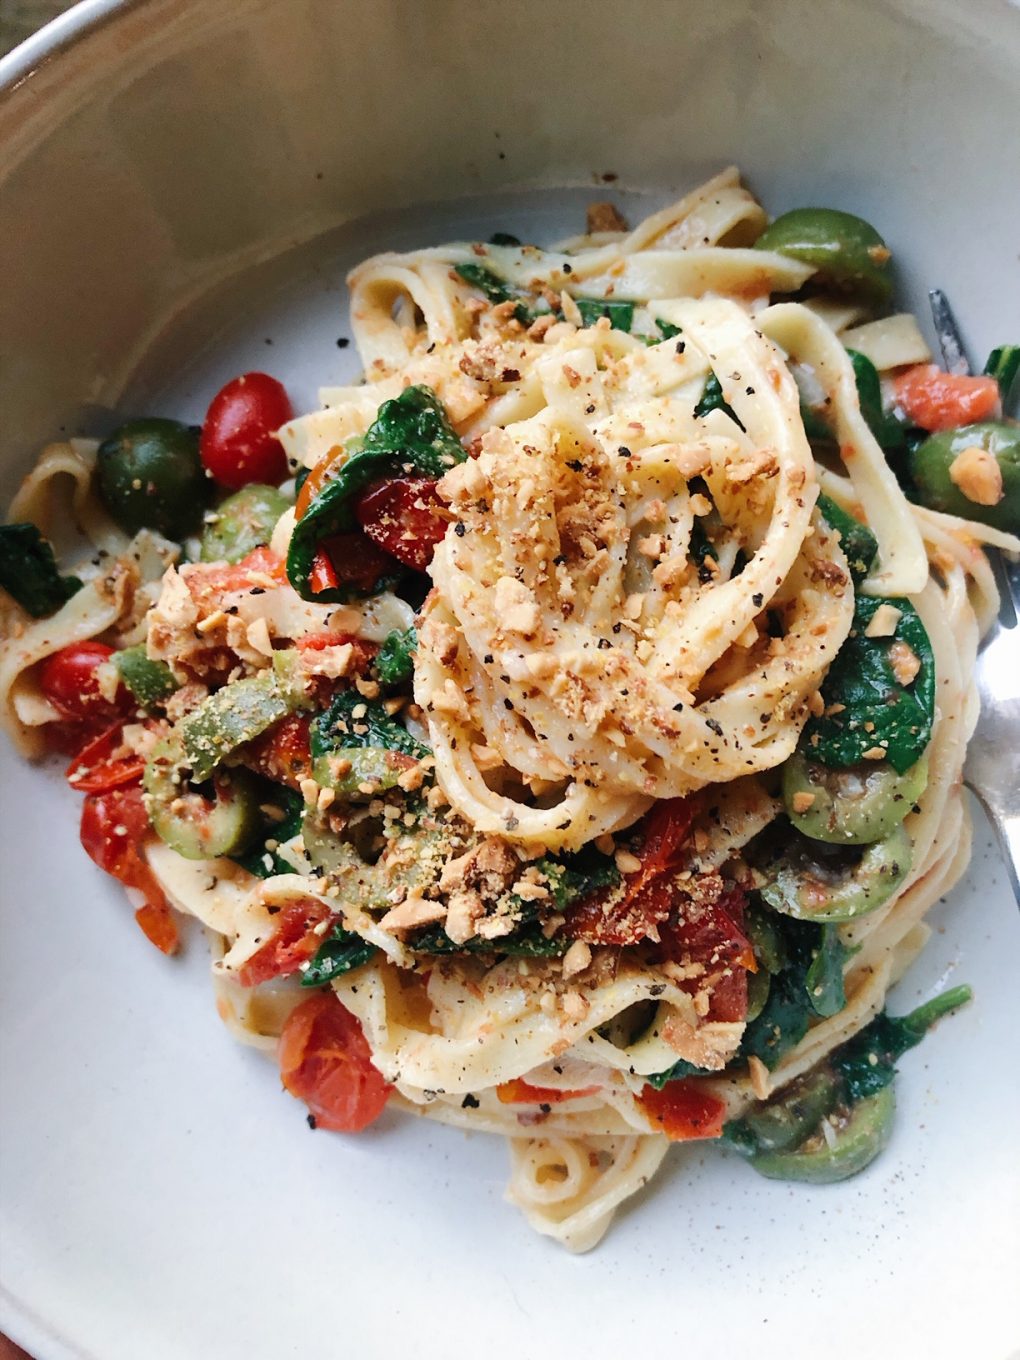 A bowl of almond flour fettuccine pasta with cherry tomatoes, spinach, and olives. Topped with toasted almond "parmesan" cheese in a big white bowl